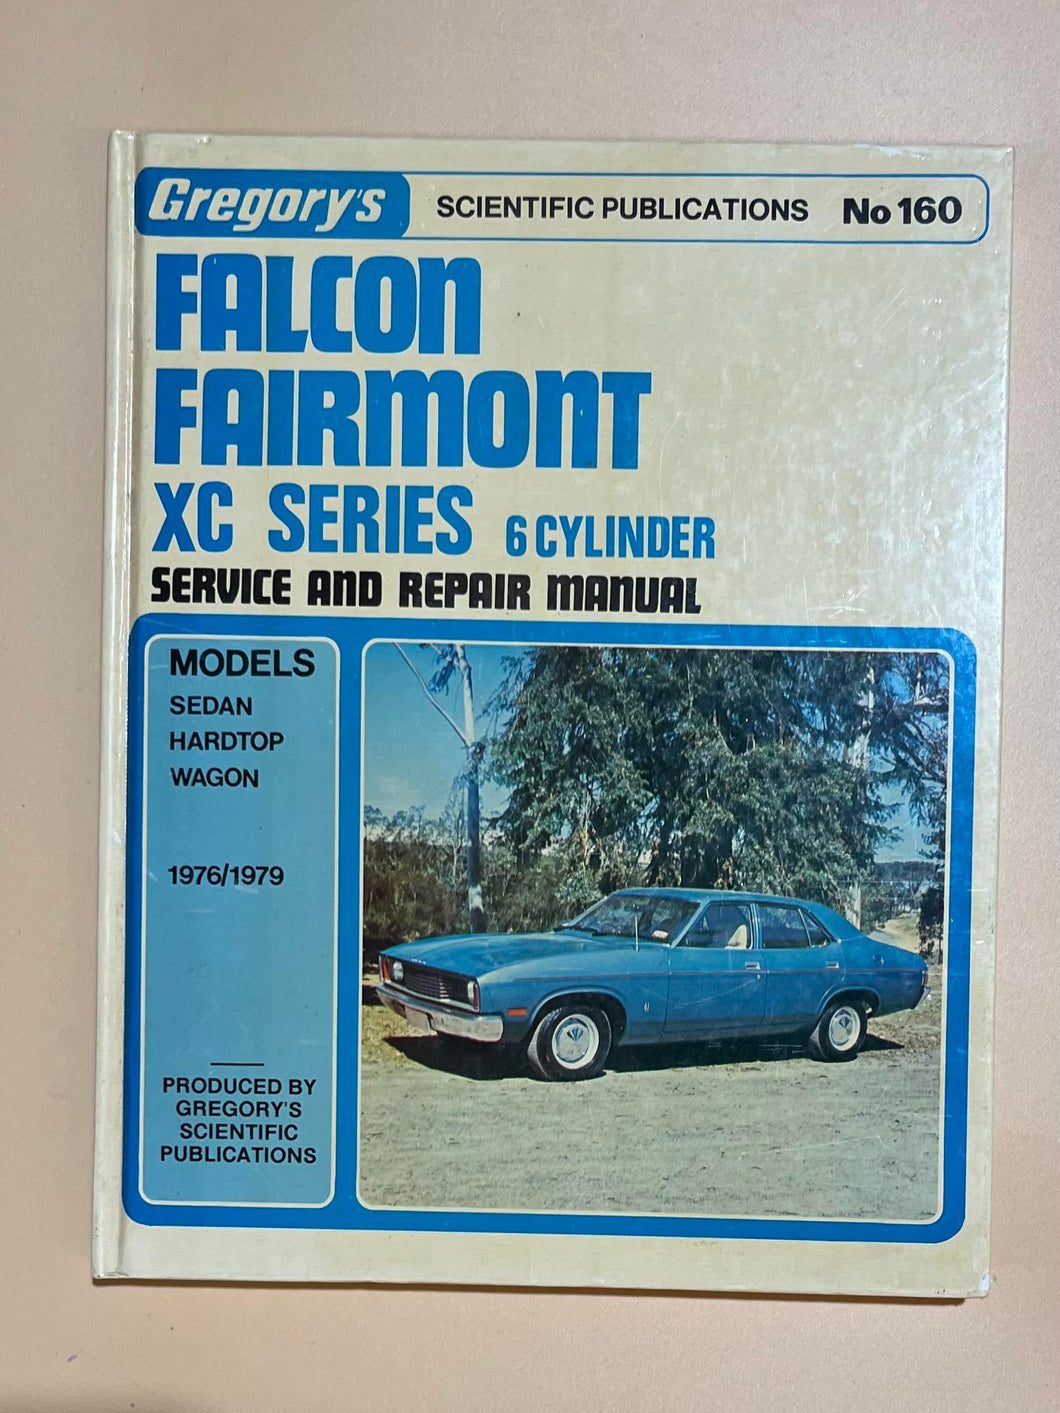 Falcon Fairmont XC Series 6 Cylinder Service and Repair Manual